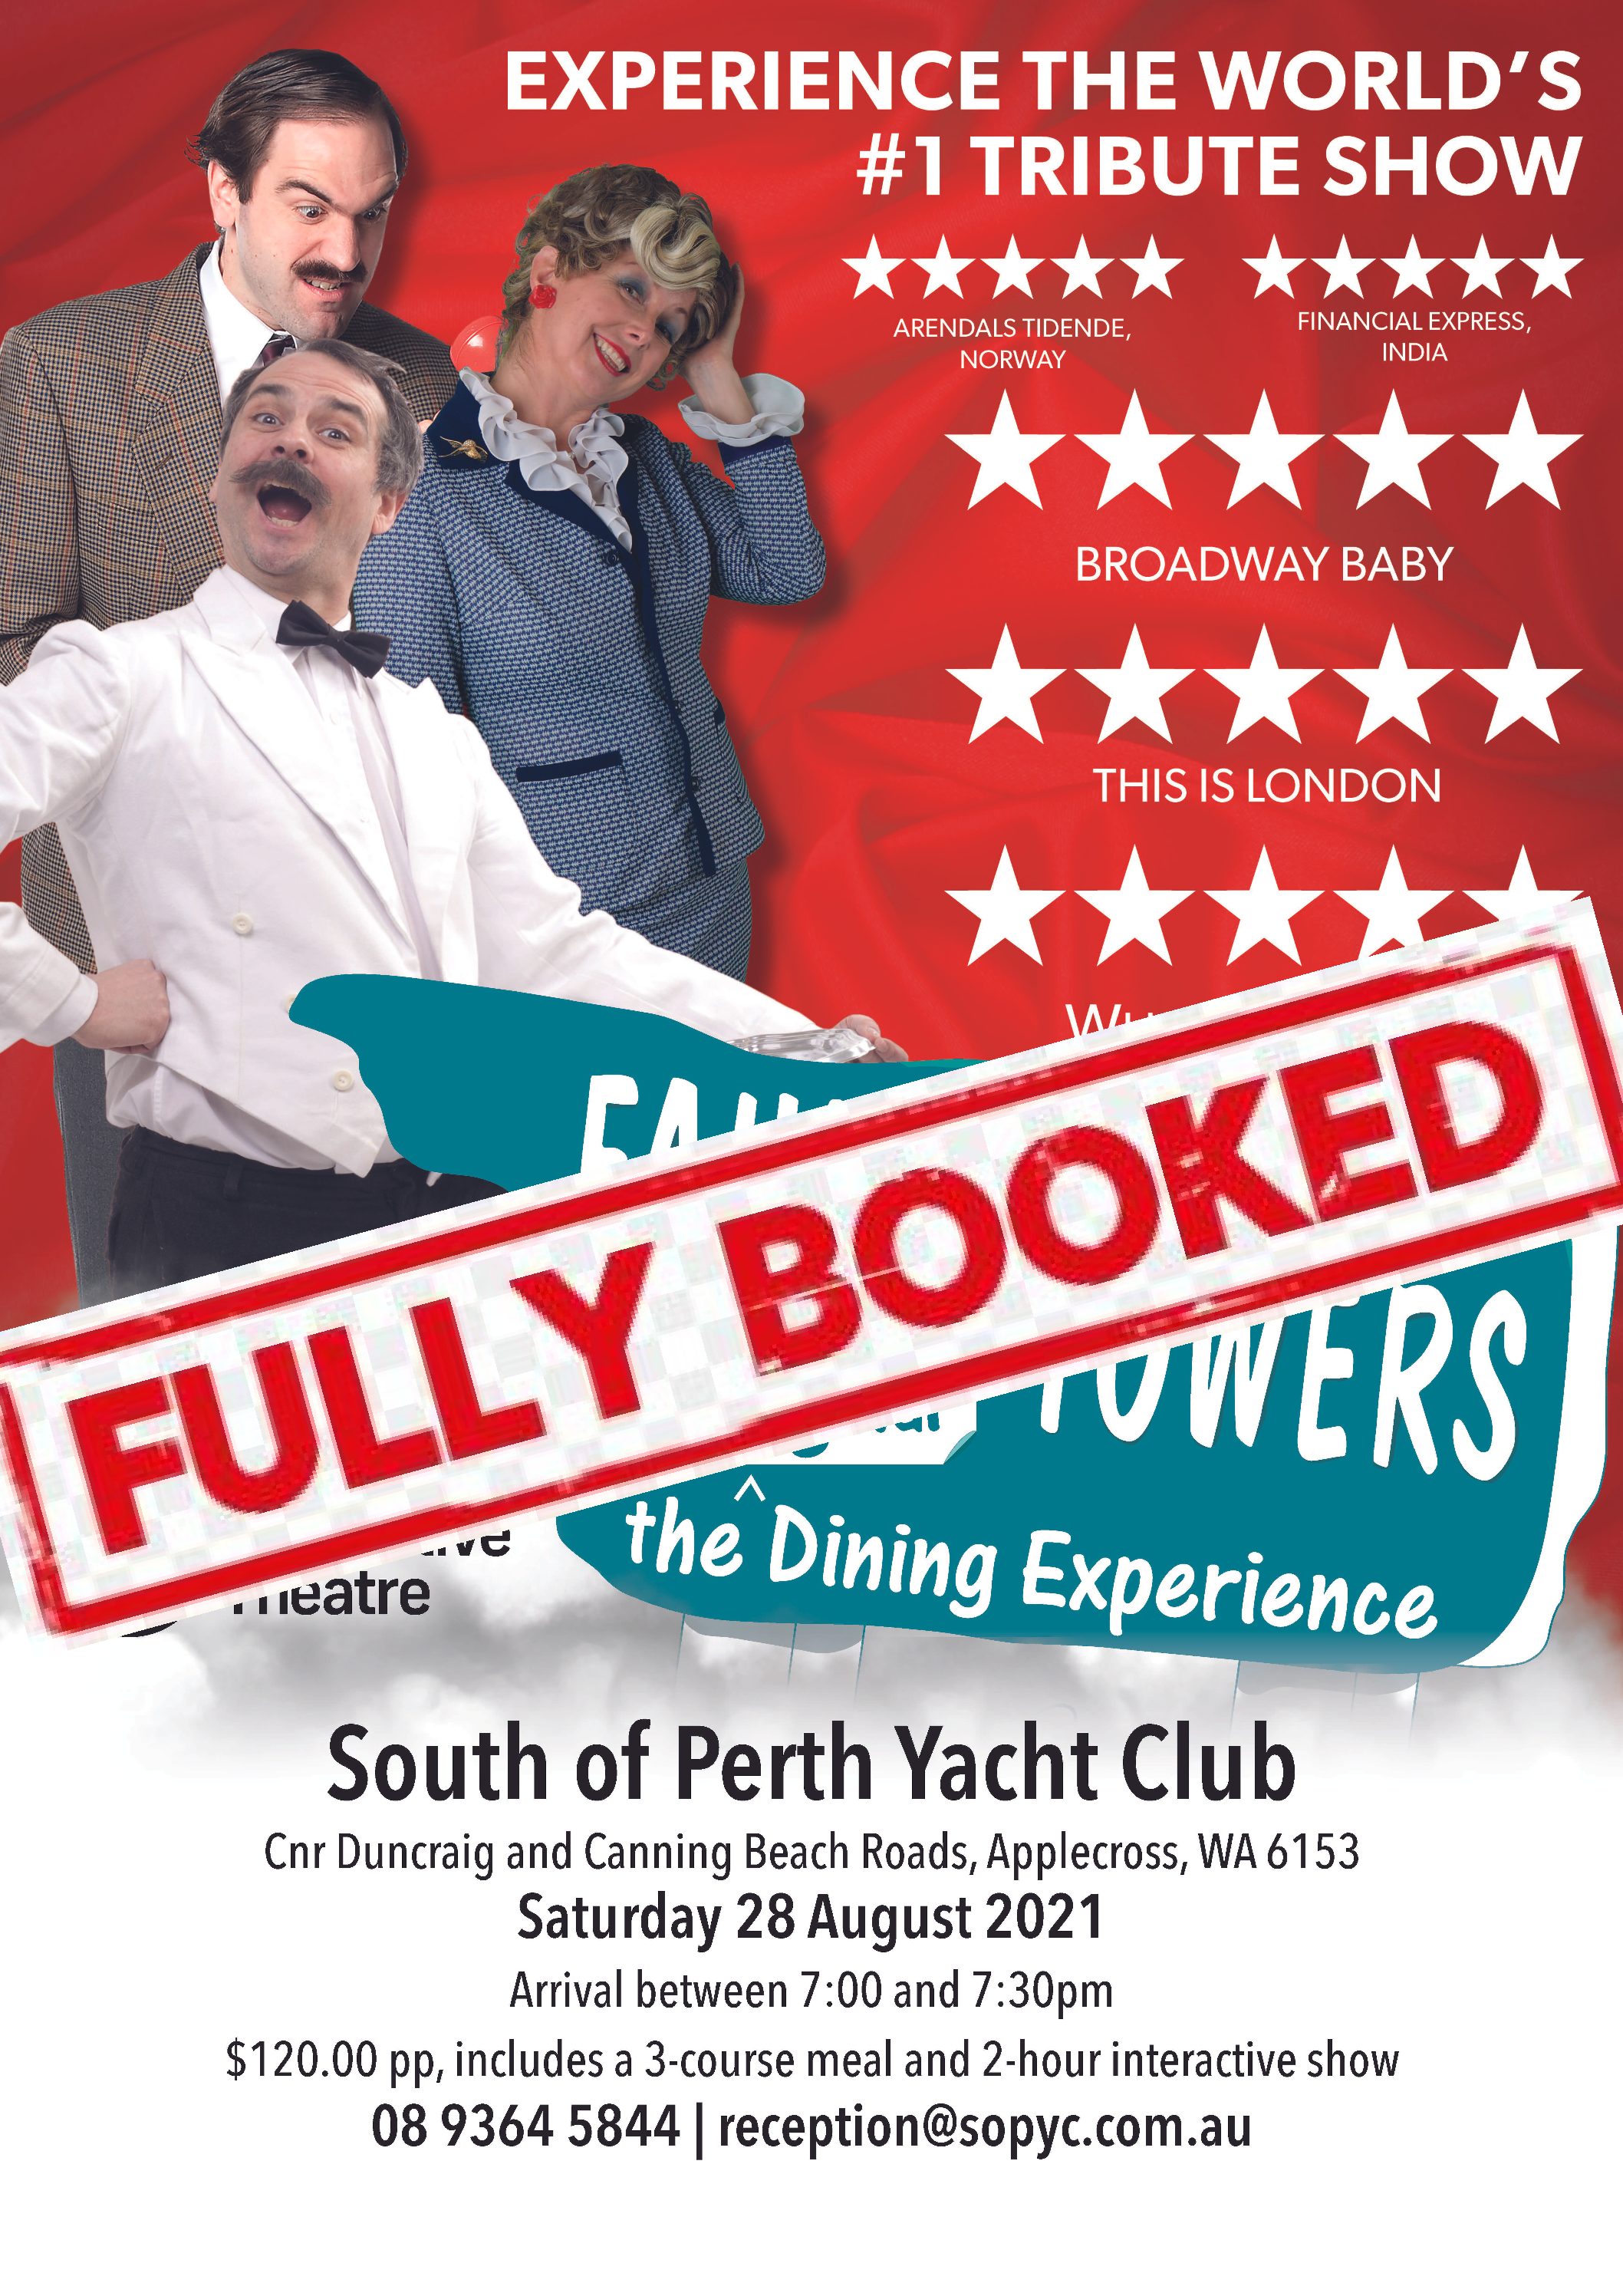 Faulty Towers - Please, collect your tickets!